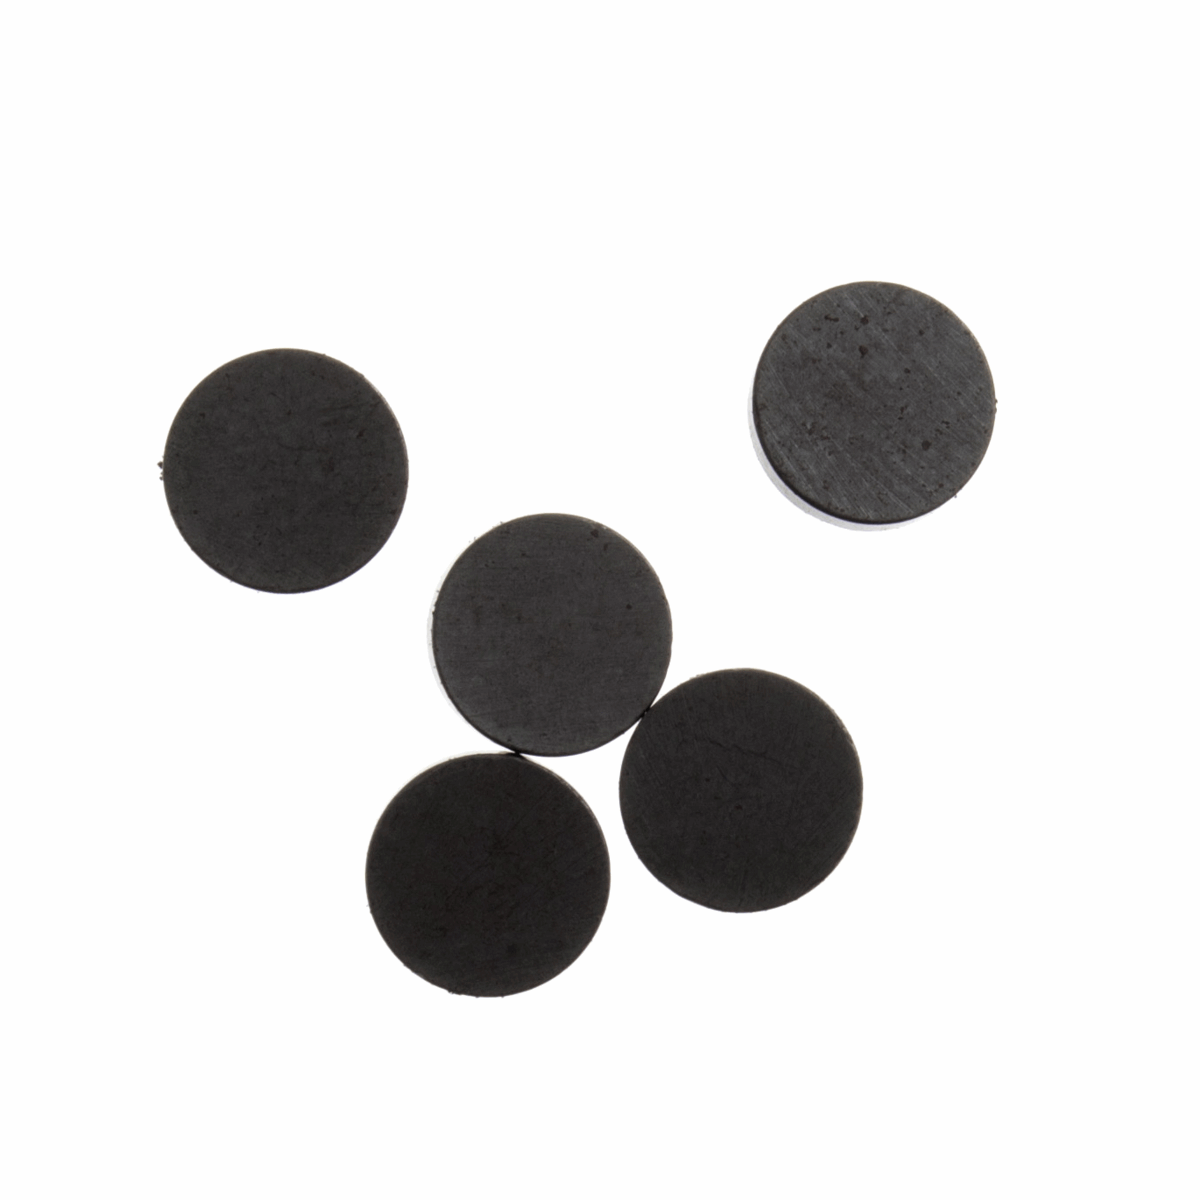 Trimits Round Coin Magnets: 15mm x 3mm - 5pk